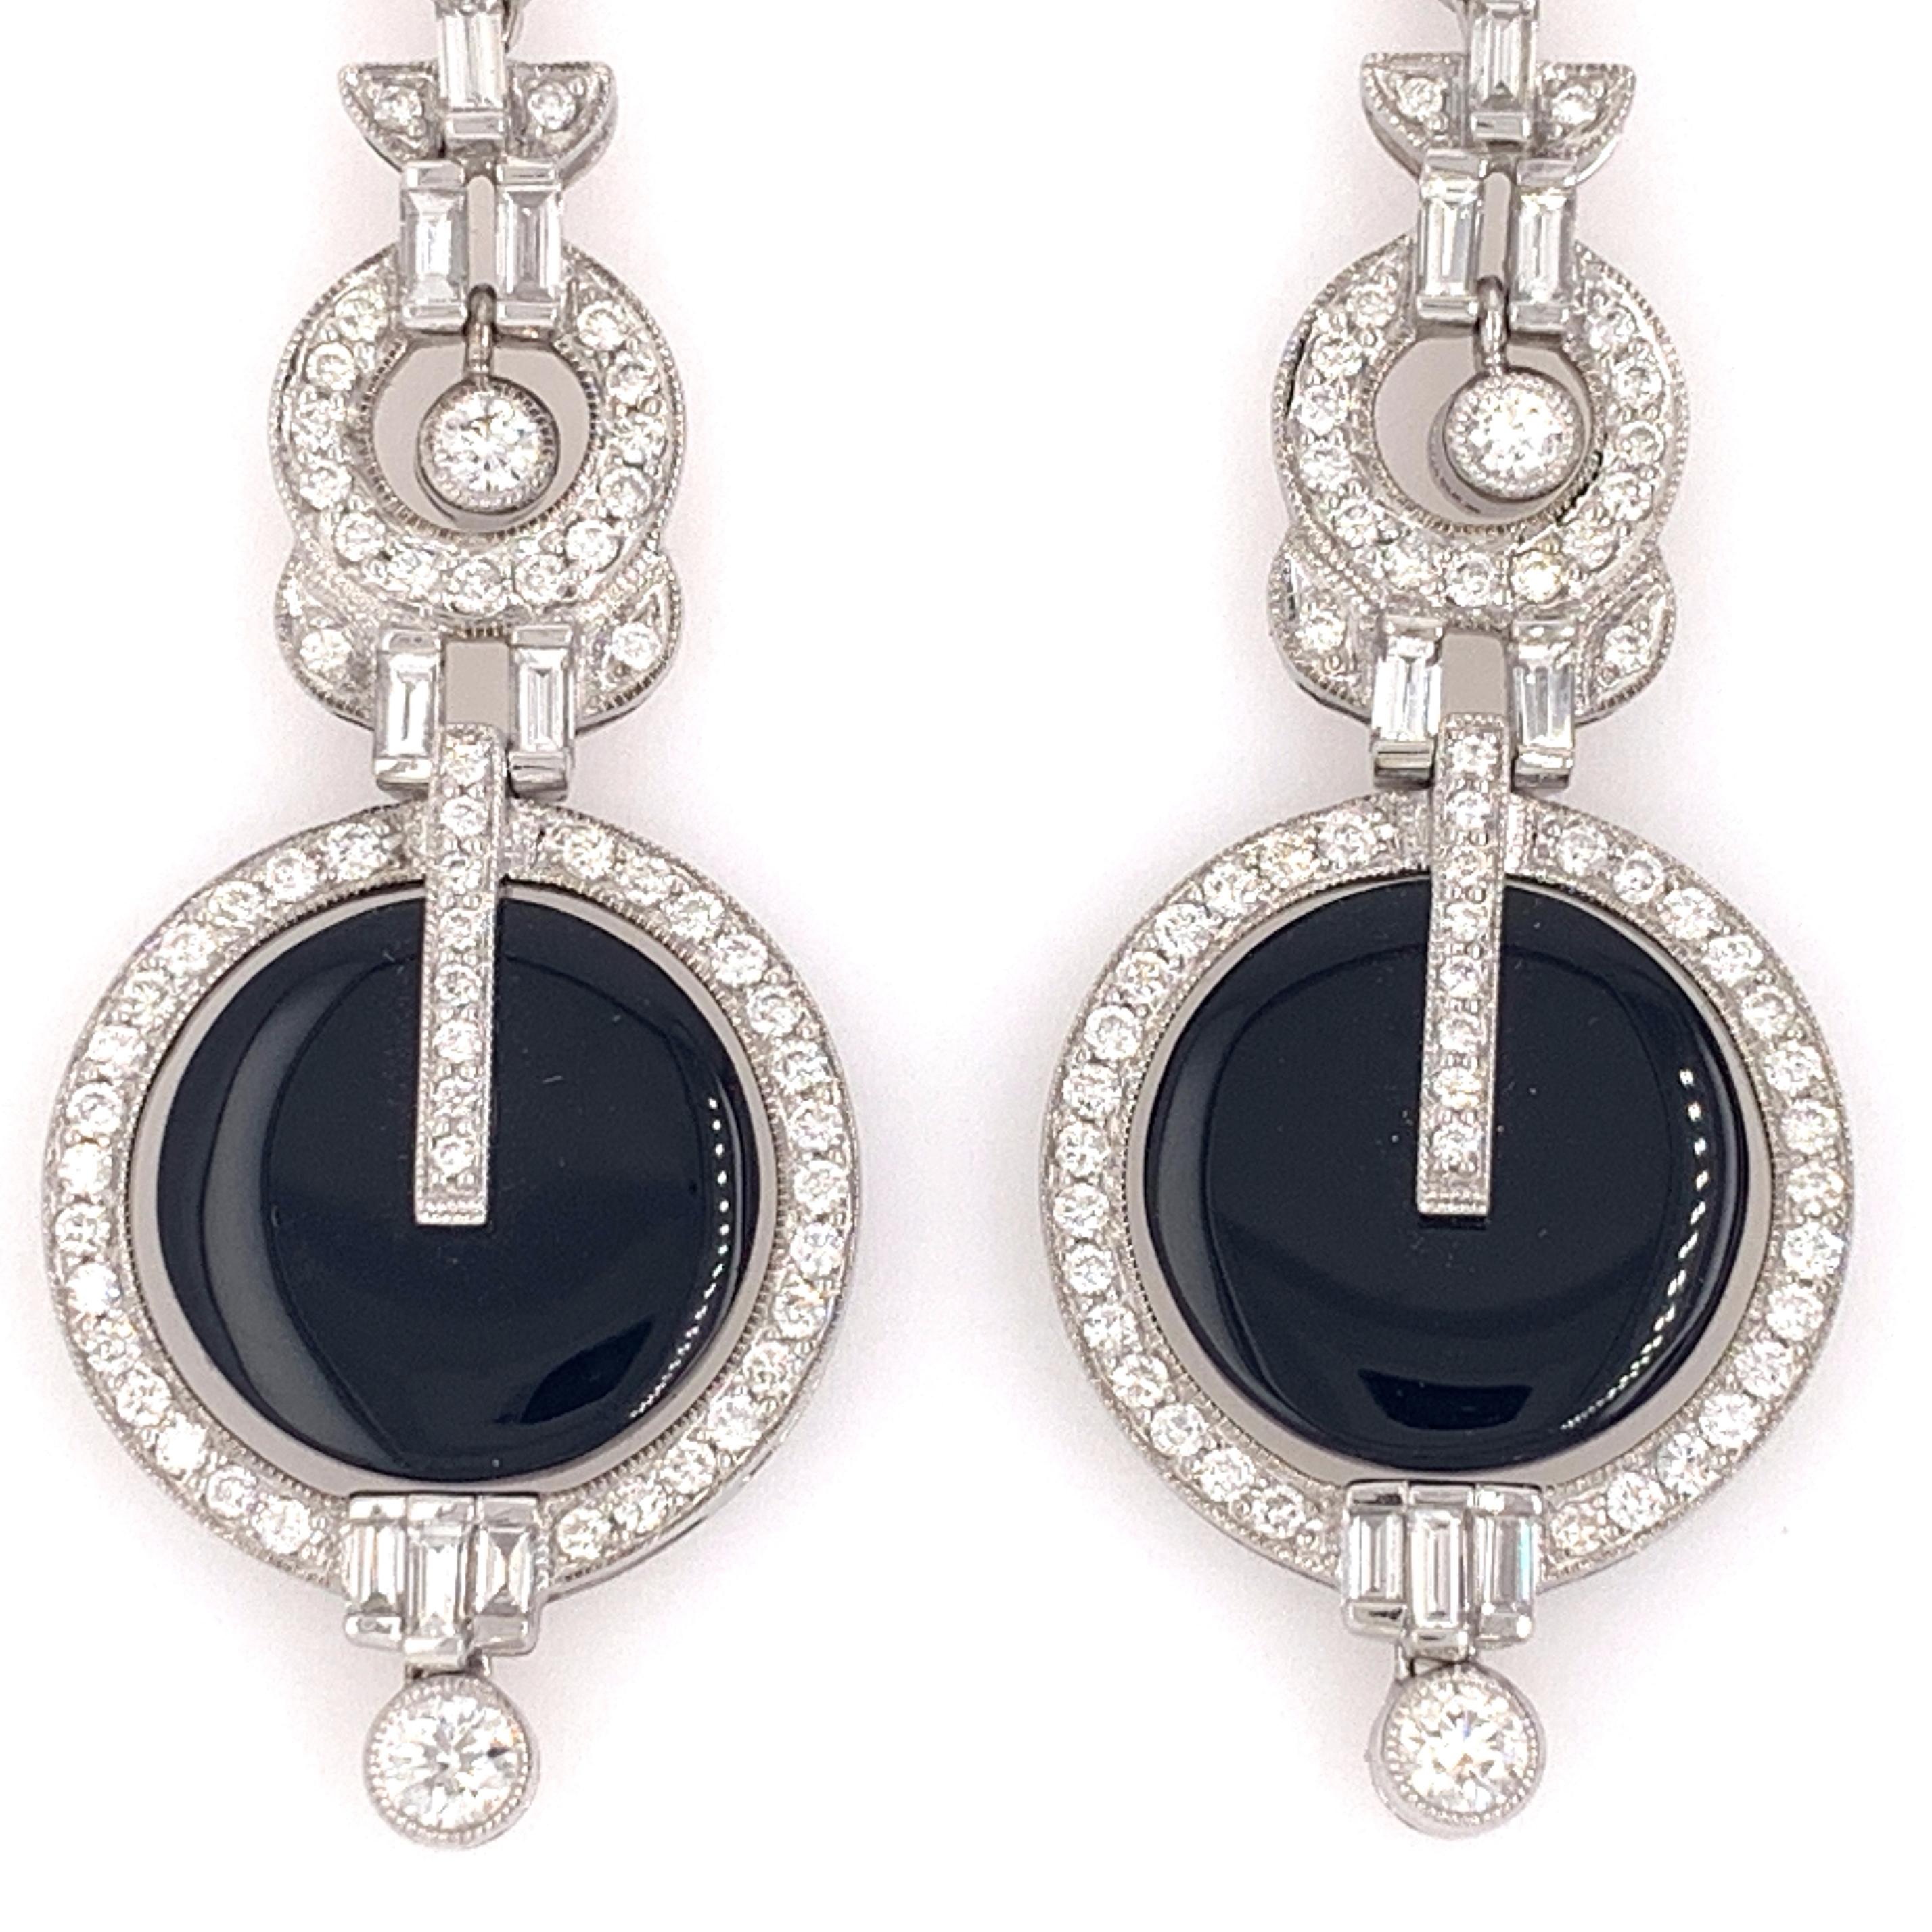 Platinum 2.46 carat diamonds showcases a stunning onyx stones earrings. 

Sophia D by Joseph Dardashti LTD has been known worldwide for 35 years and are inspired by classic Art Deco design that merges with modern manufacturing techniques.